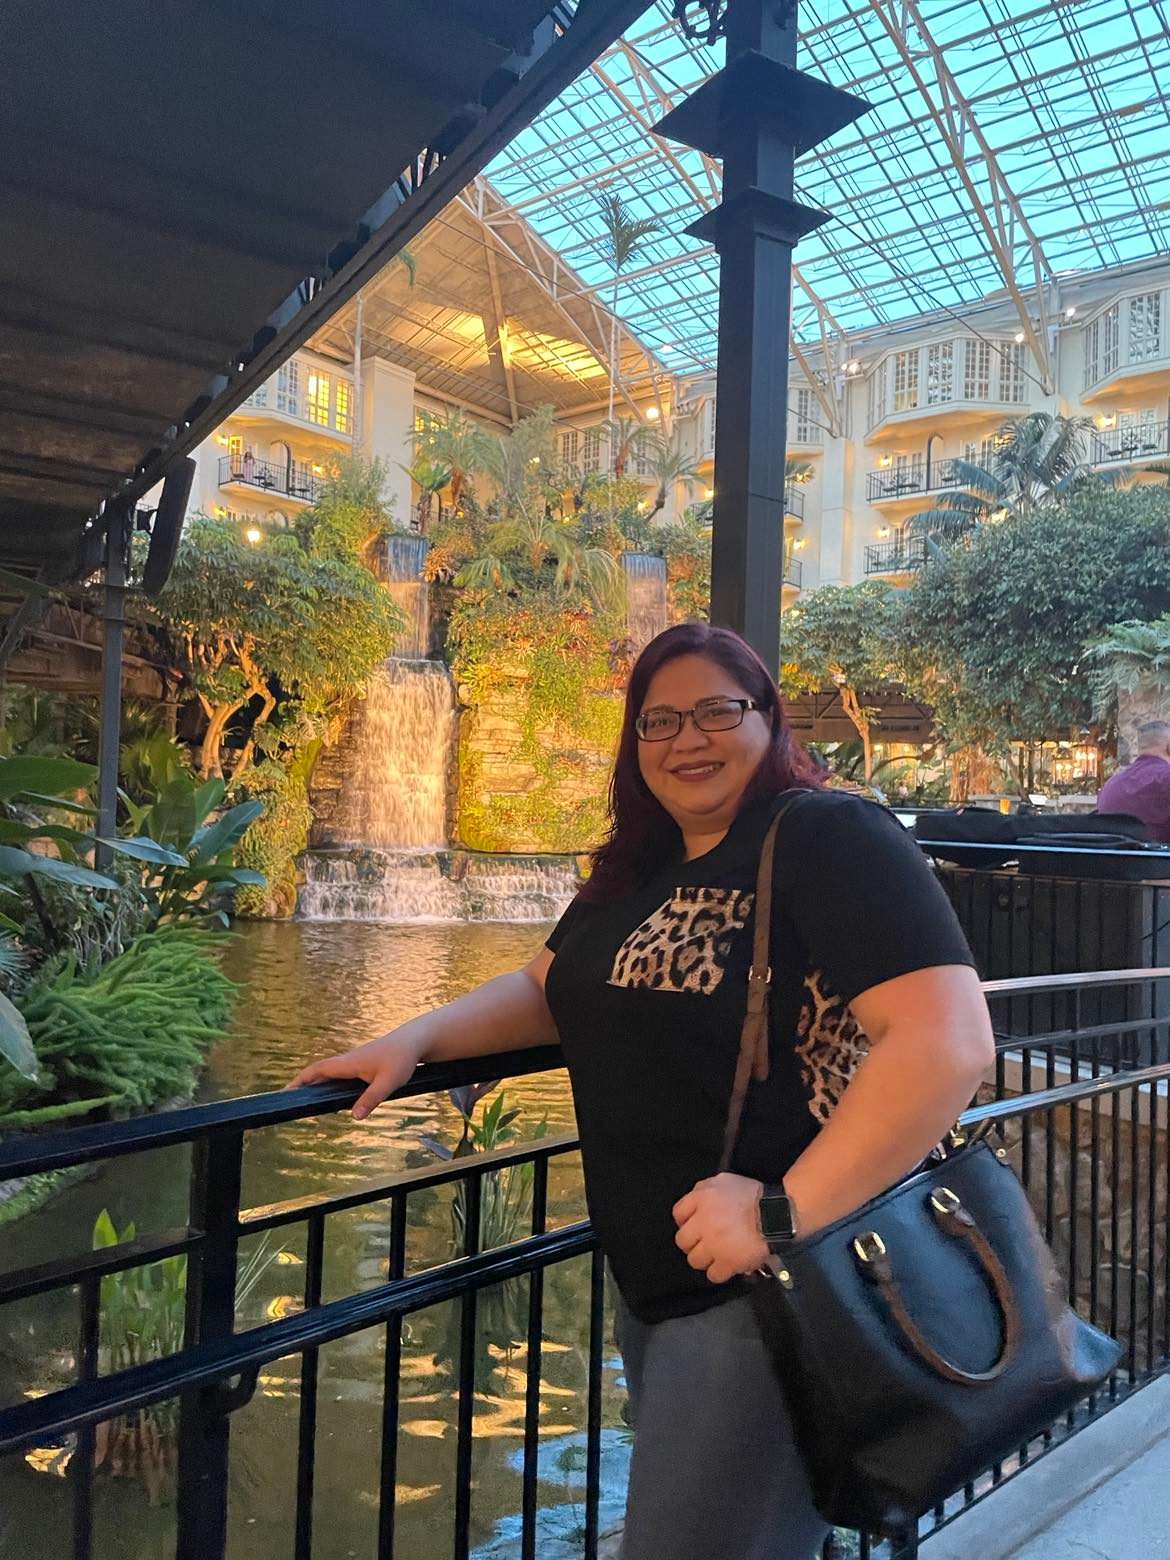 Angie Joy posing in front of an indoor water feature while traveling in Nashville.